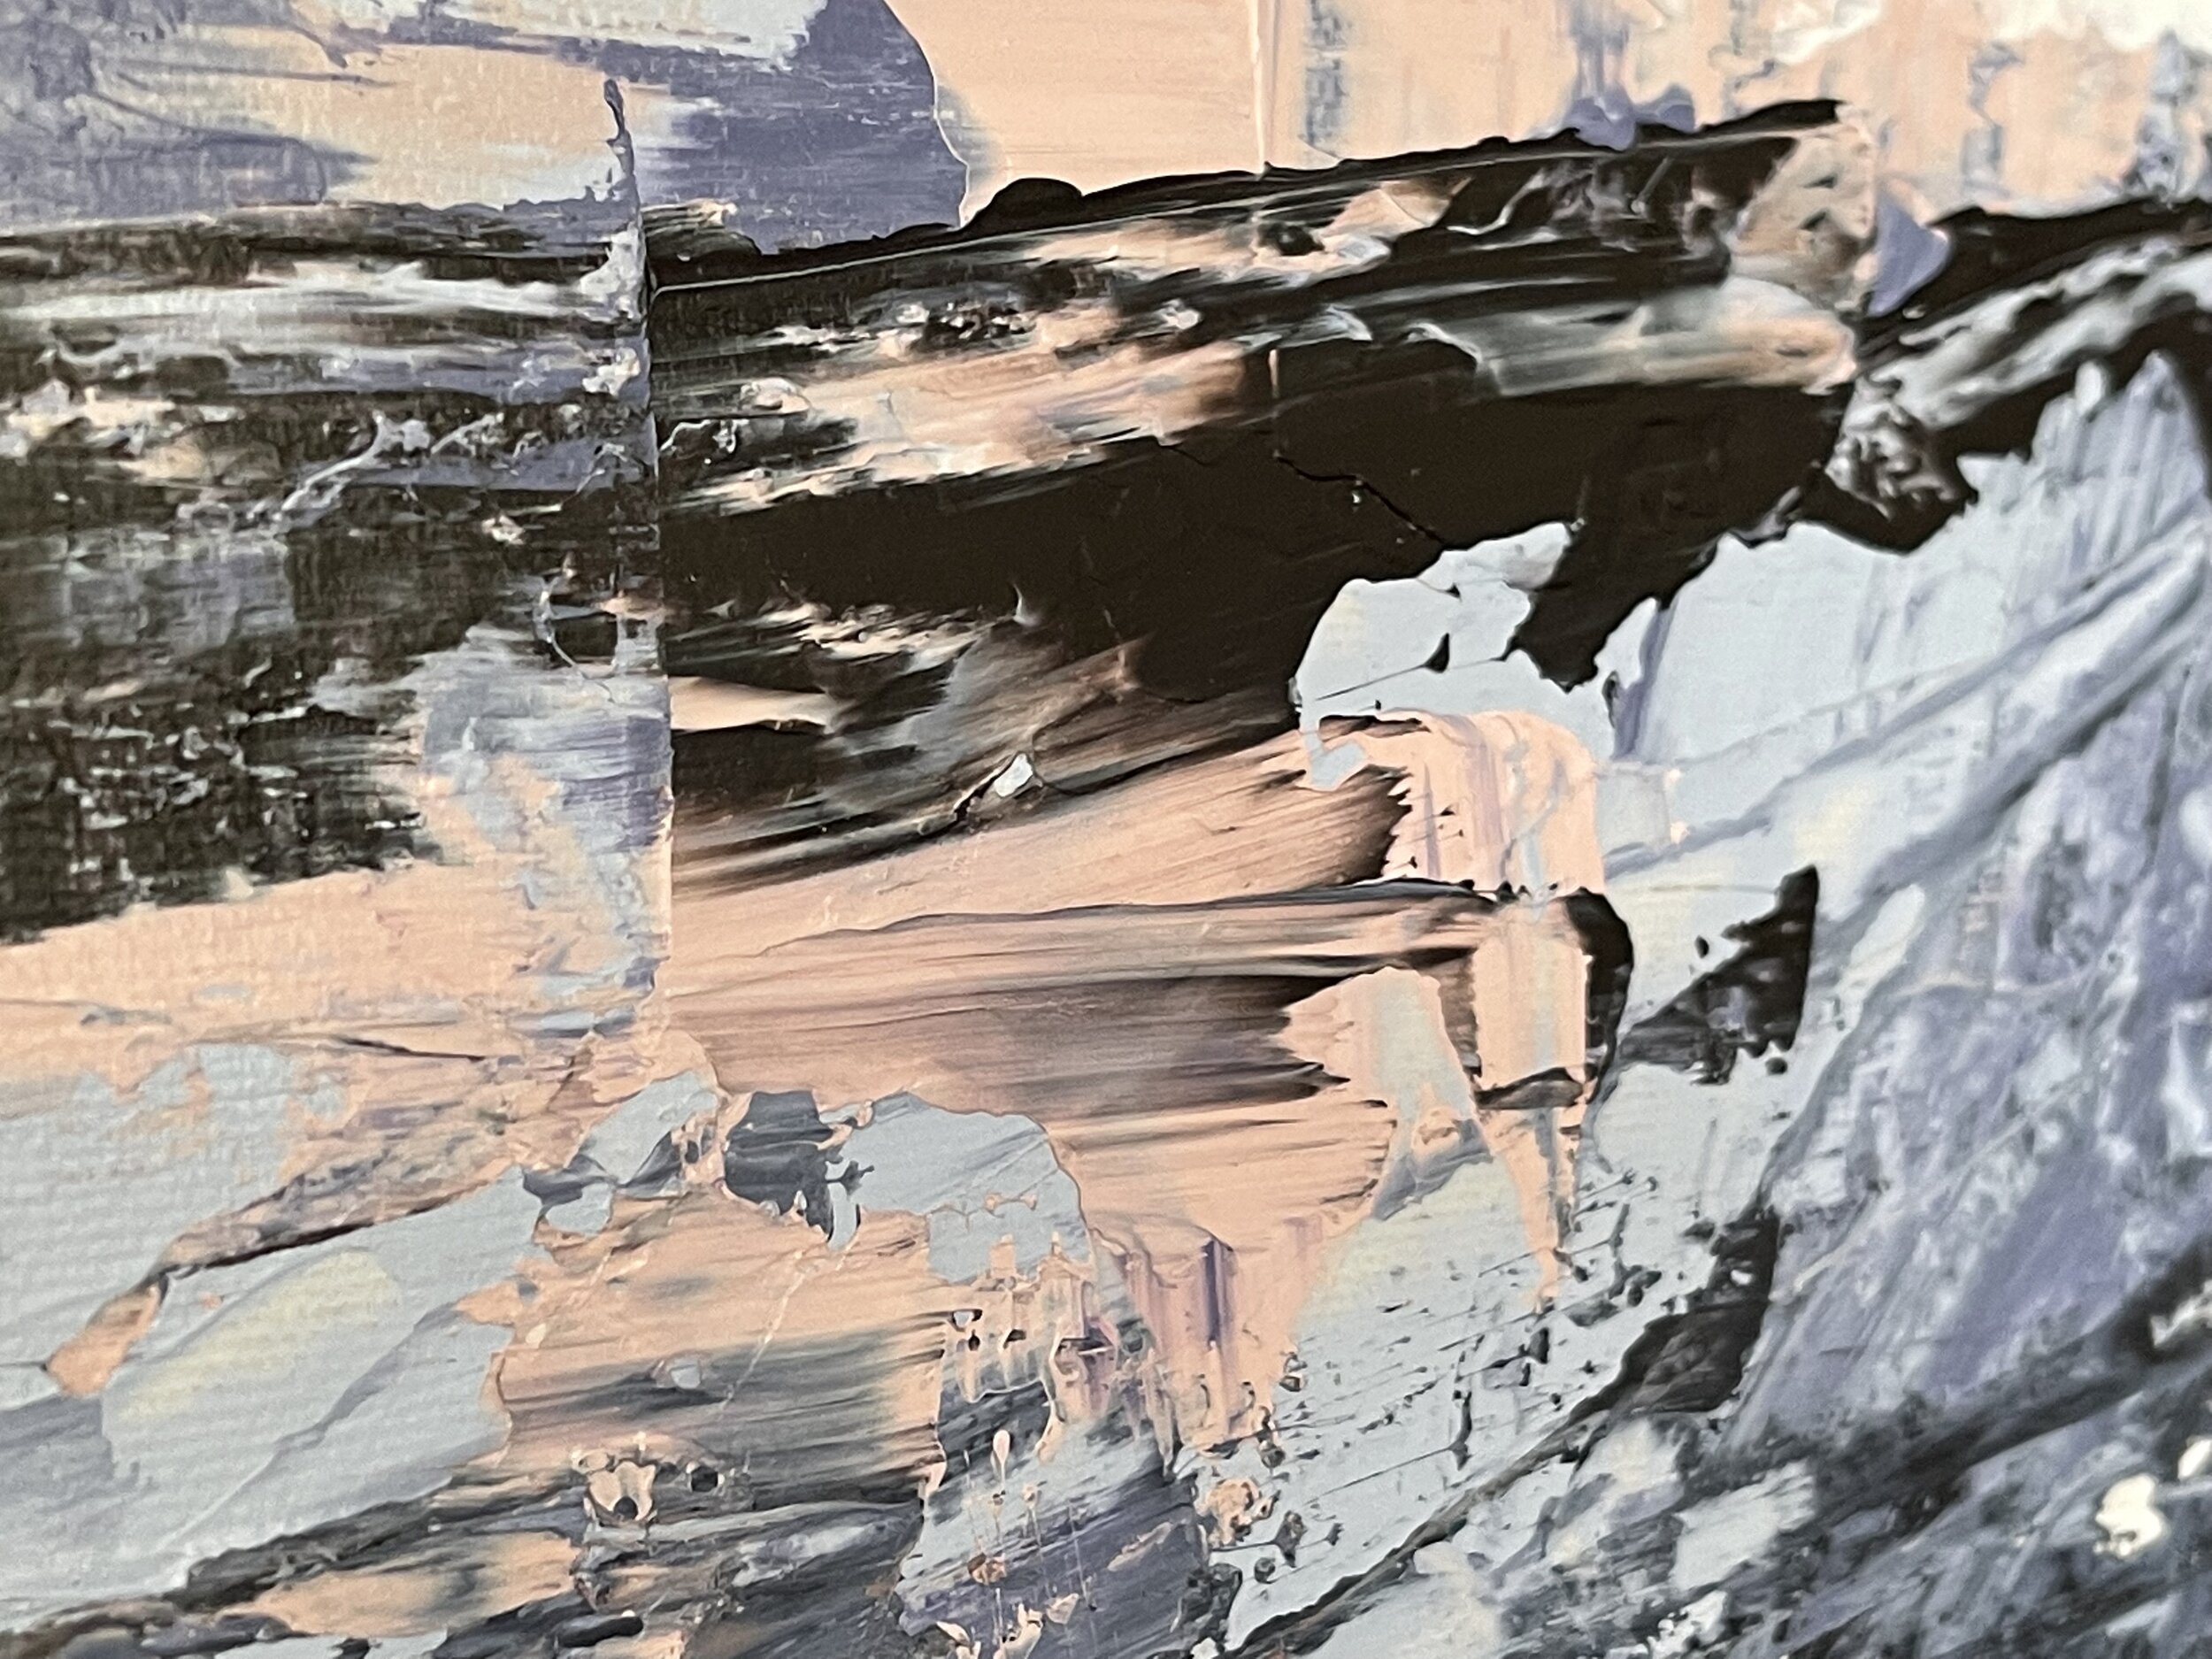  Here are some up close and detailed images of Donna Giraud’s textural abstract work. The layers of paint and unique shapes allow for tons of depth and a constant evolution in what you see when you look at it.  